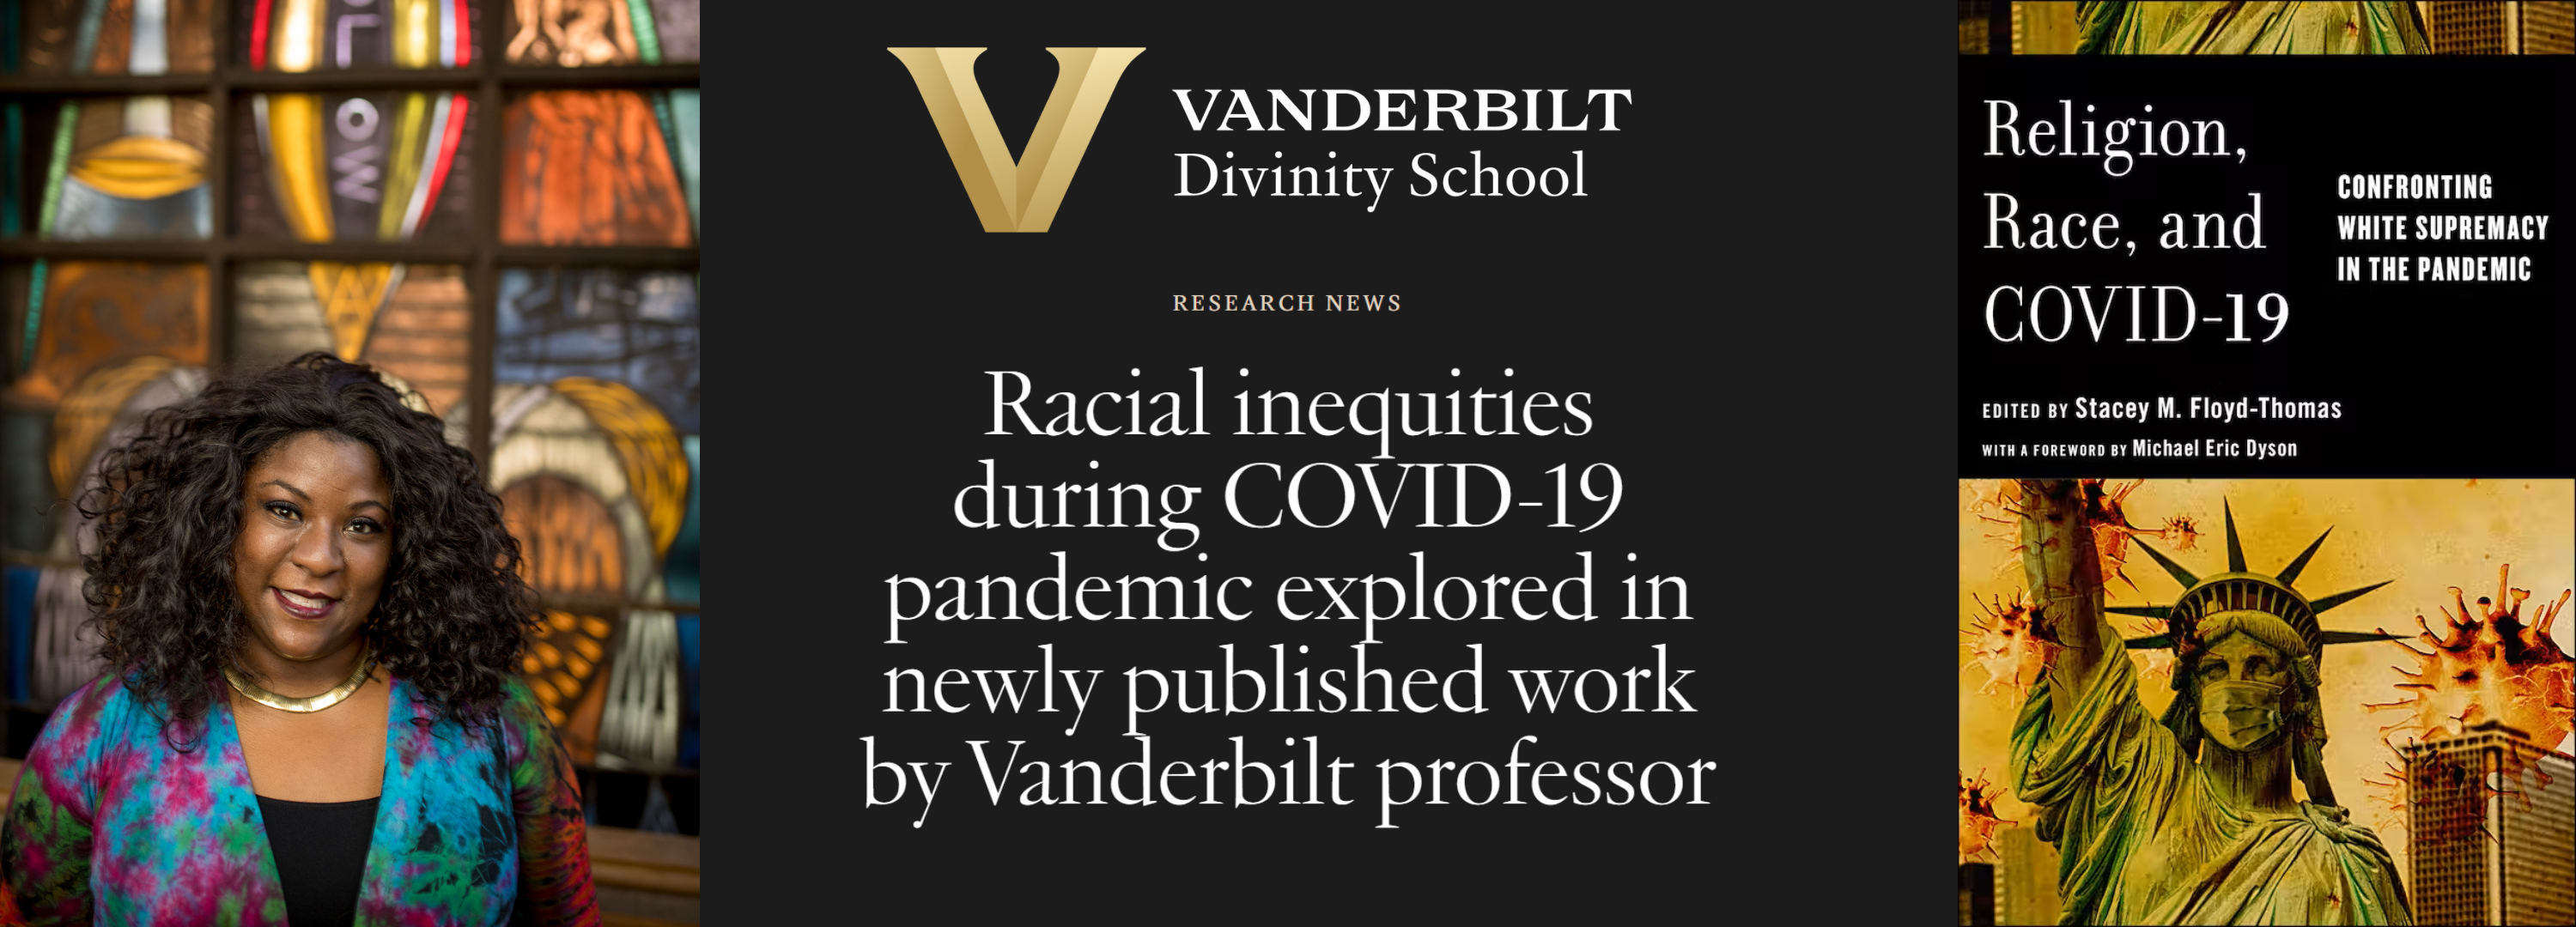 Racial inequities during COVID-19 pandemic explored in newly published work by Vanderbilt professor